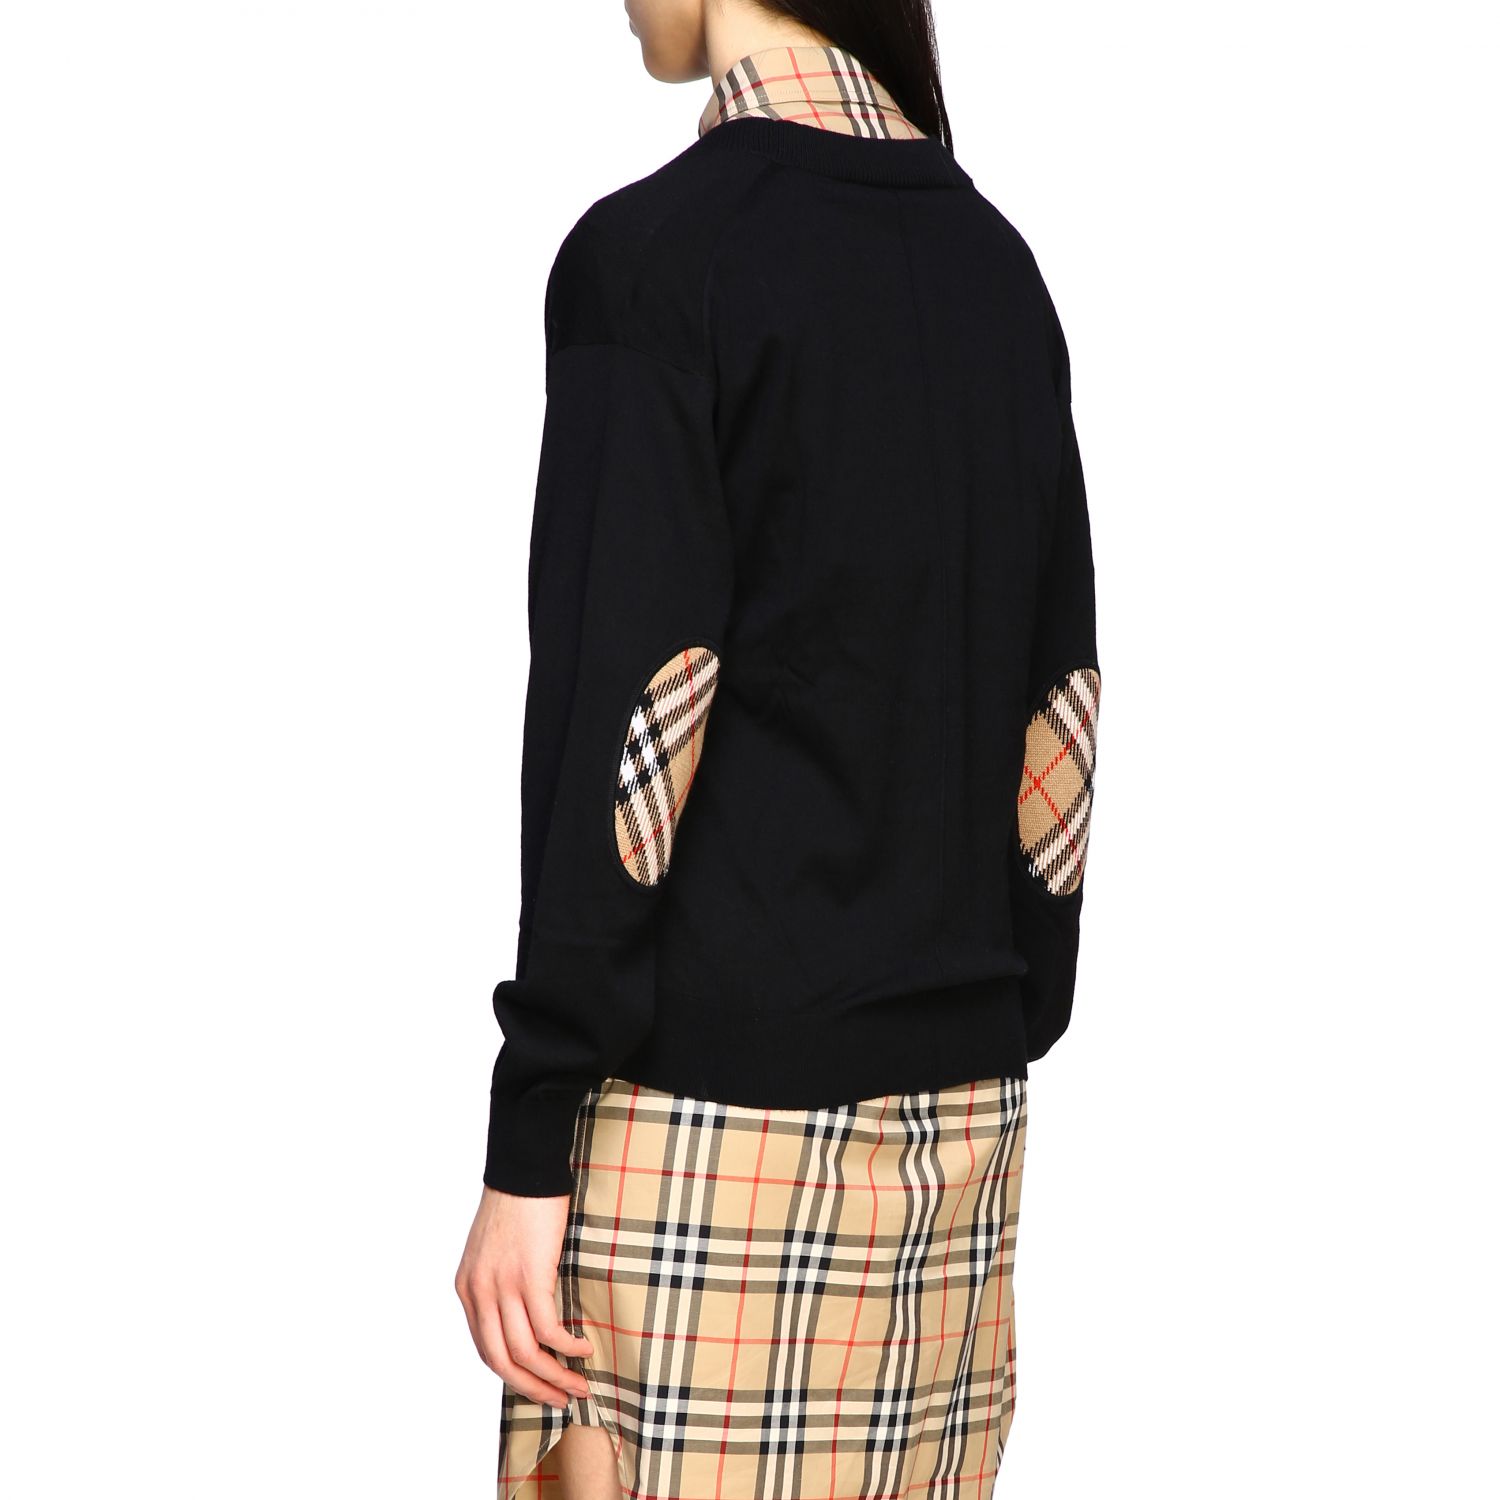 burberry patch sweater